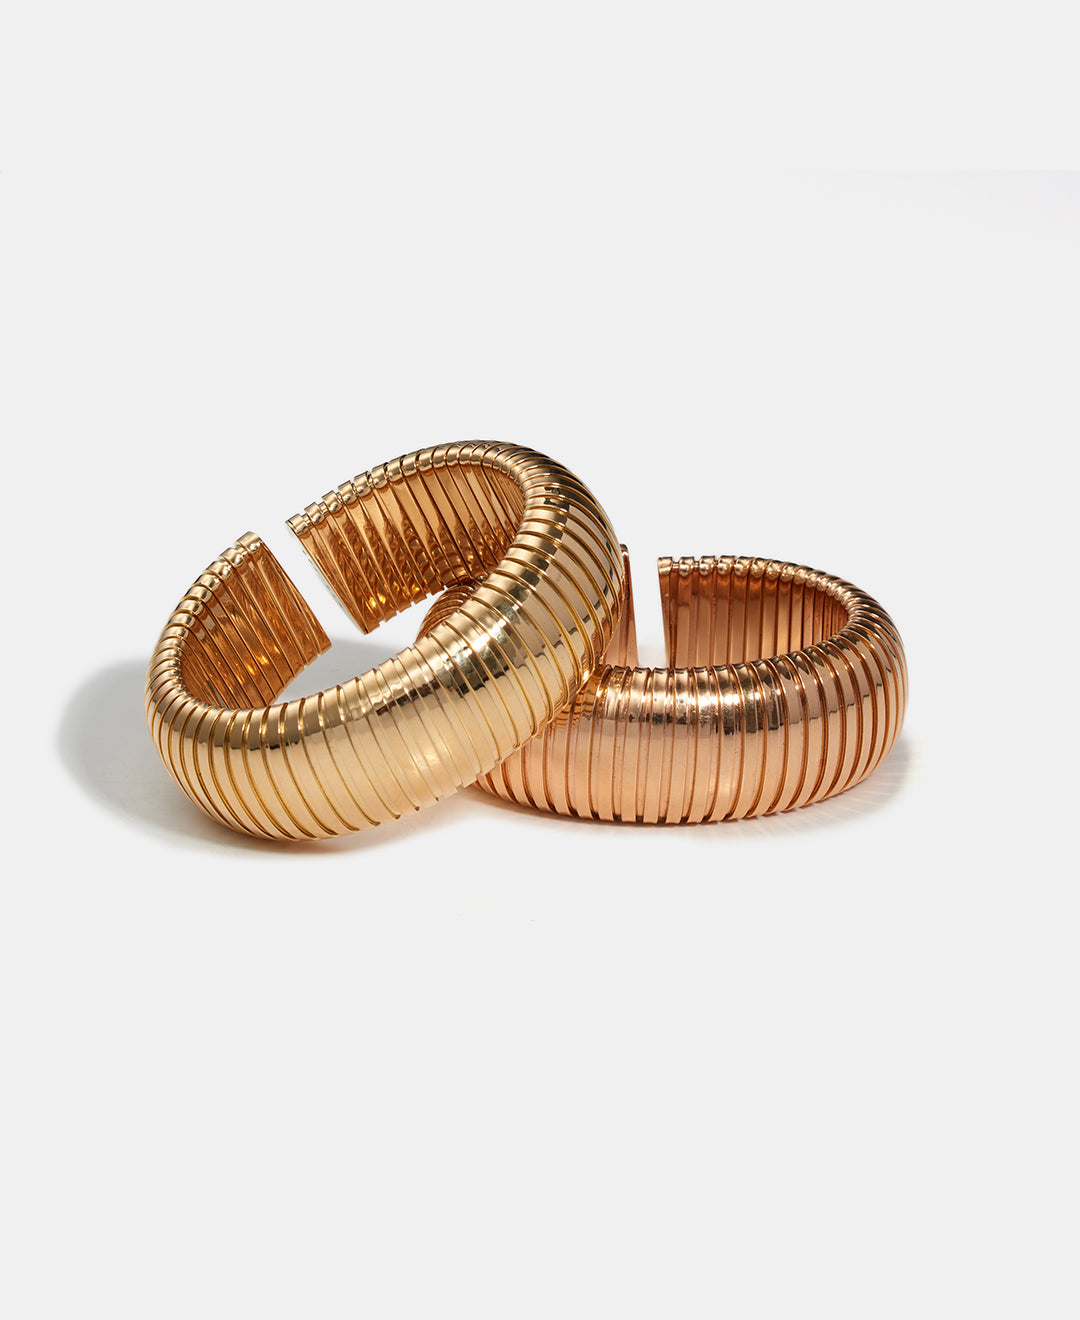 Two domed cuffs, one in yellow gold, and one in rose gold are displayed on a white background.